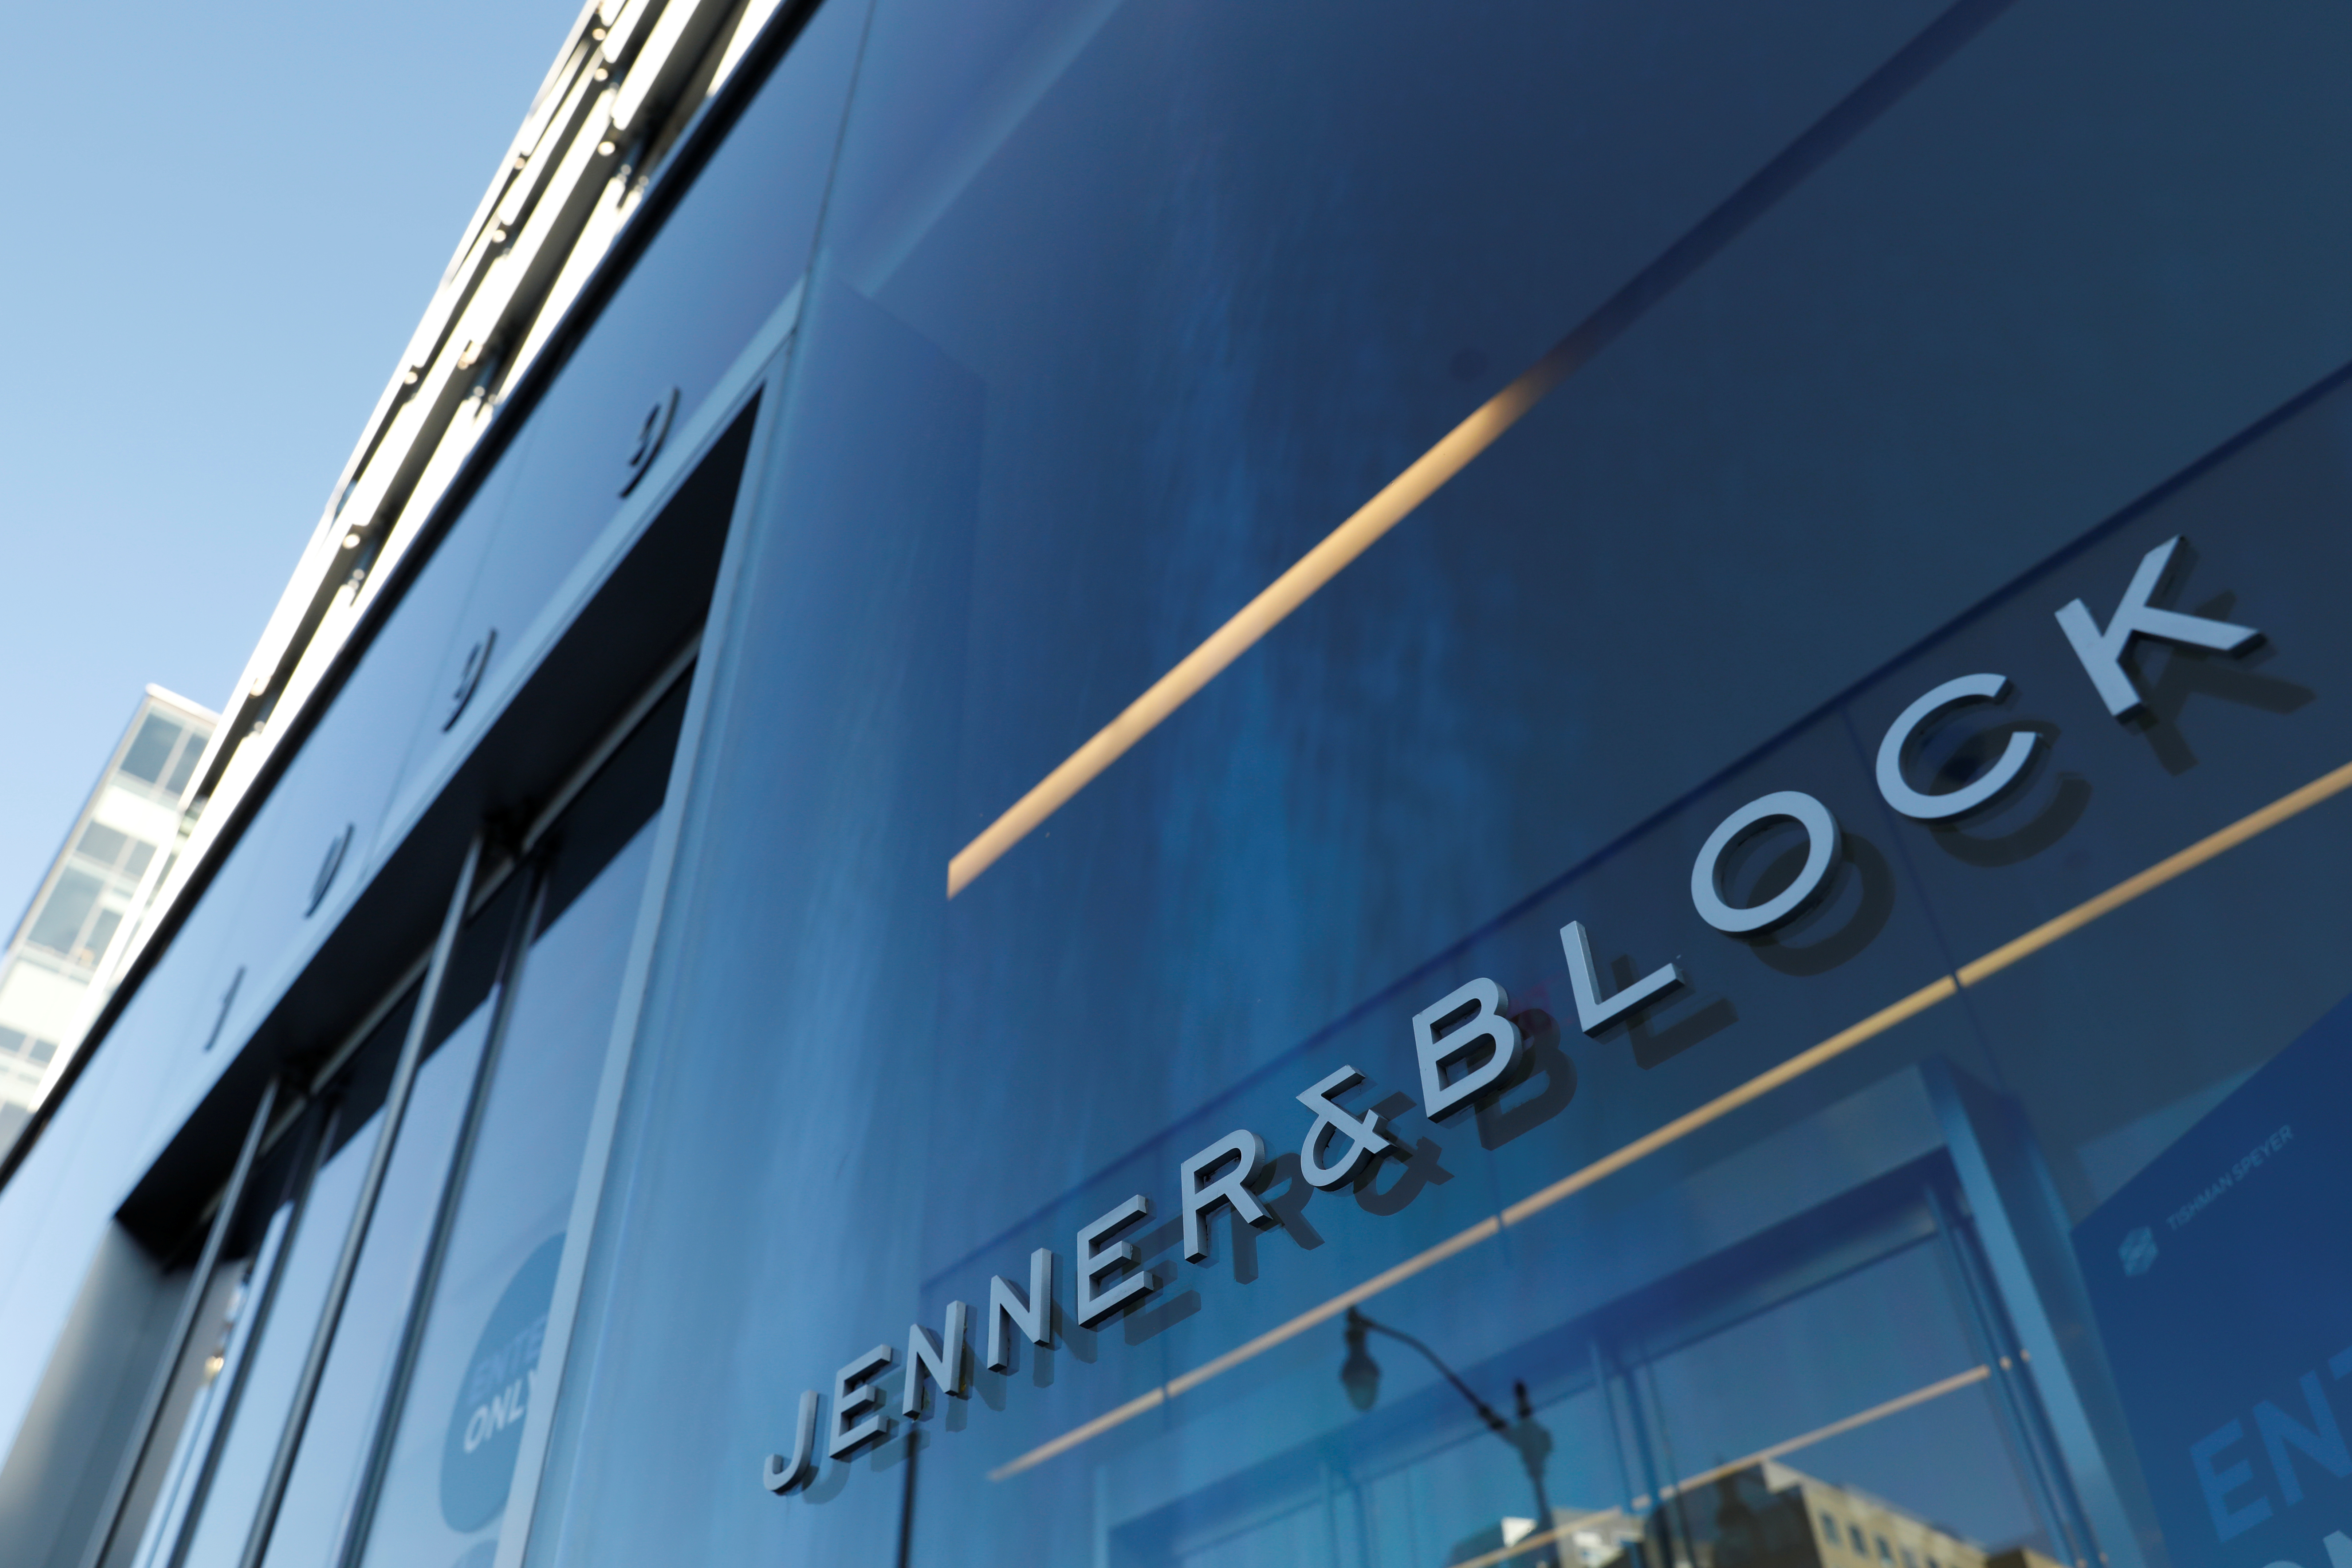 Signage is seen outside of the law firm Jenner & Block LLP in Washington, D.C.